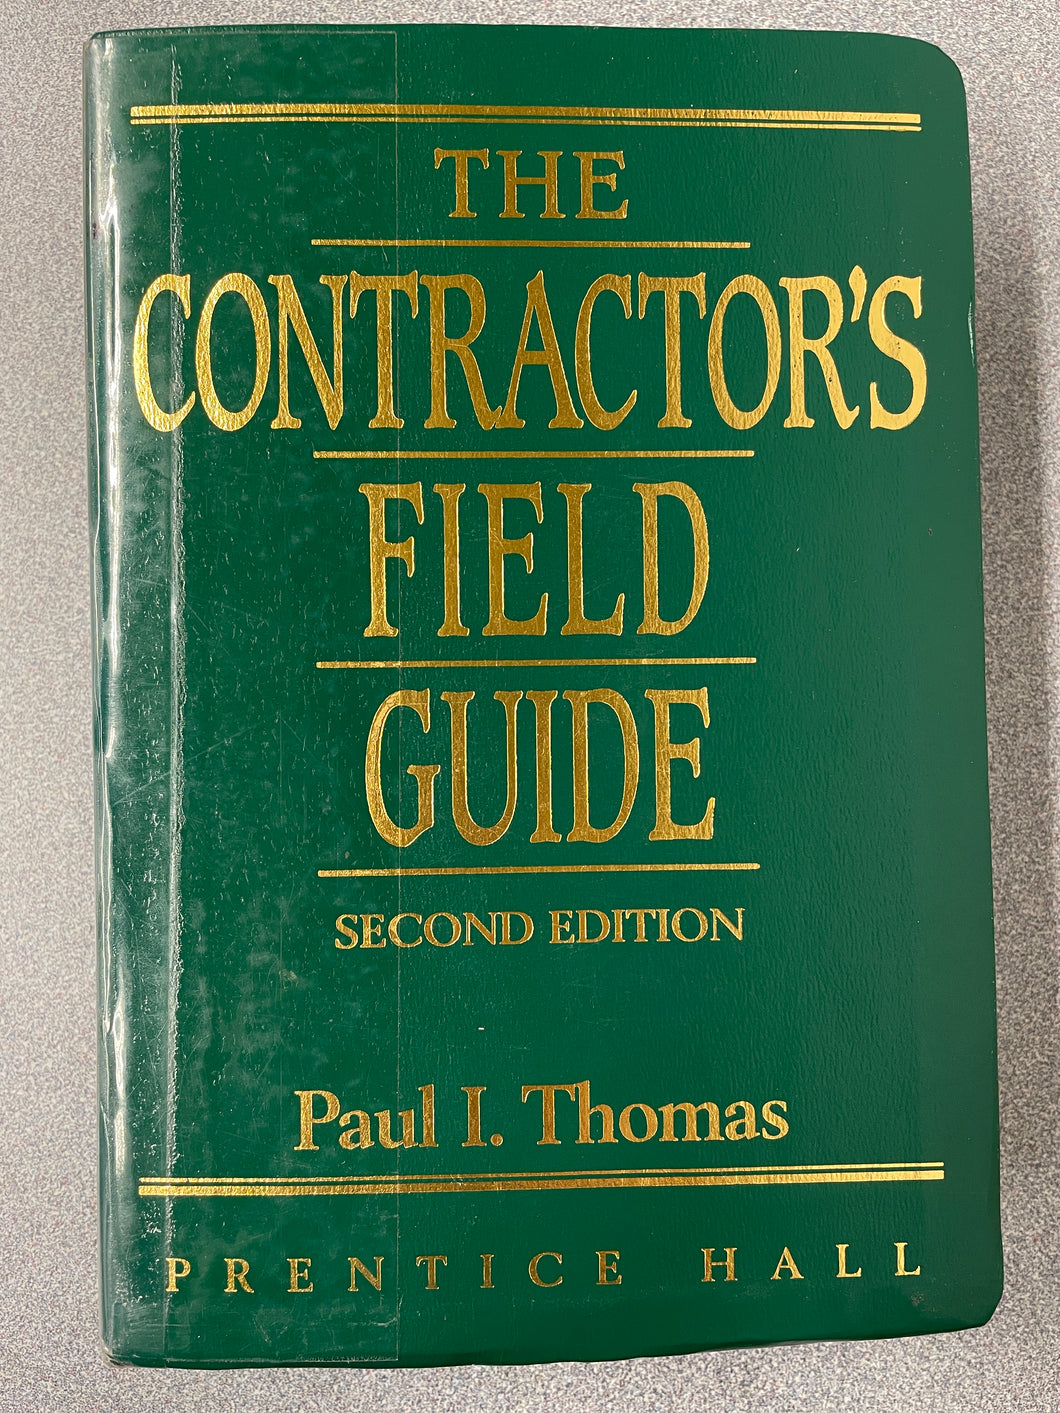 AN  The Contractor's Field Guide, Second Edition, Thomas, Paul I. [2000] N 2/24